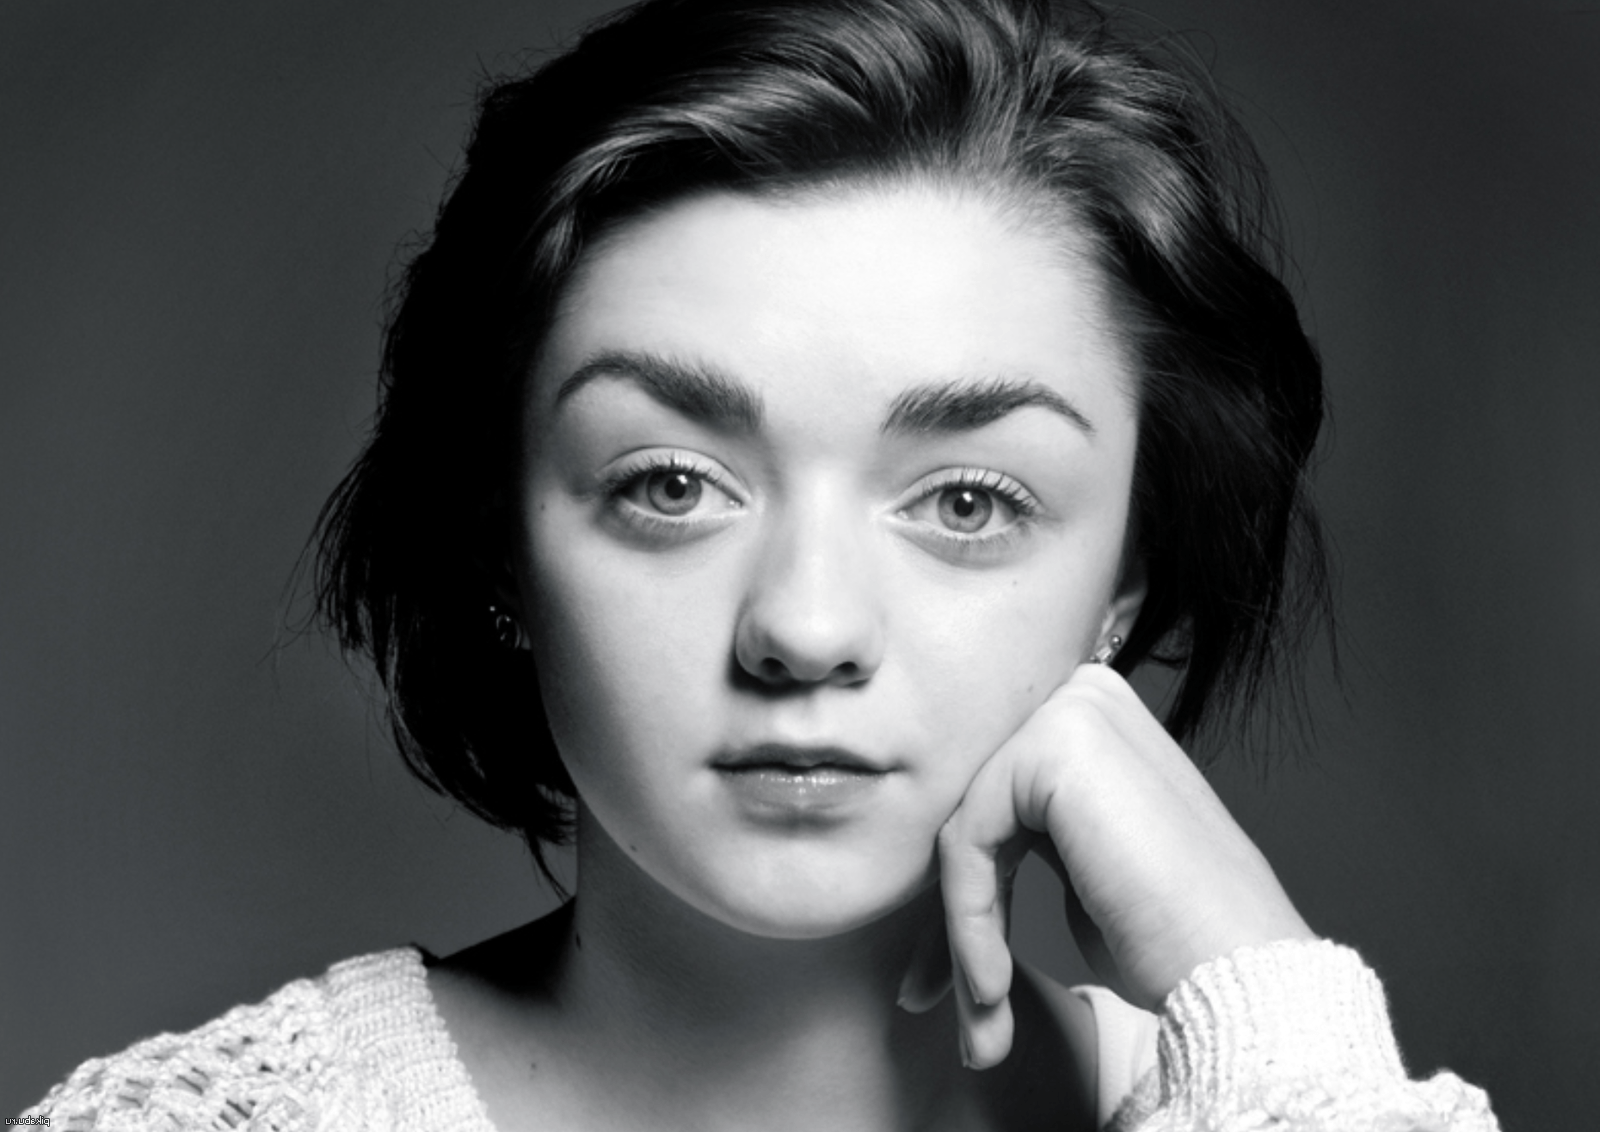 Maisie Williams Game of Thrones wallpaper 2018 in Woman